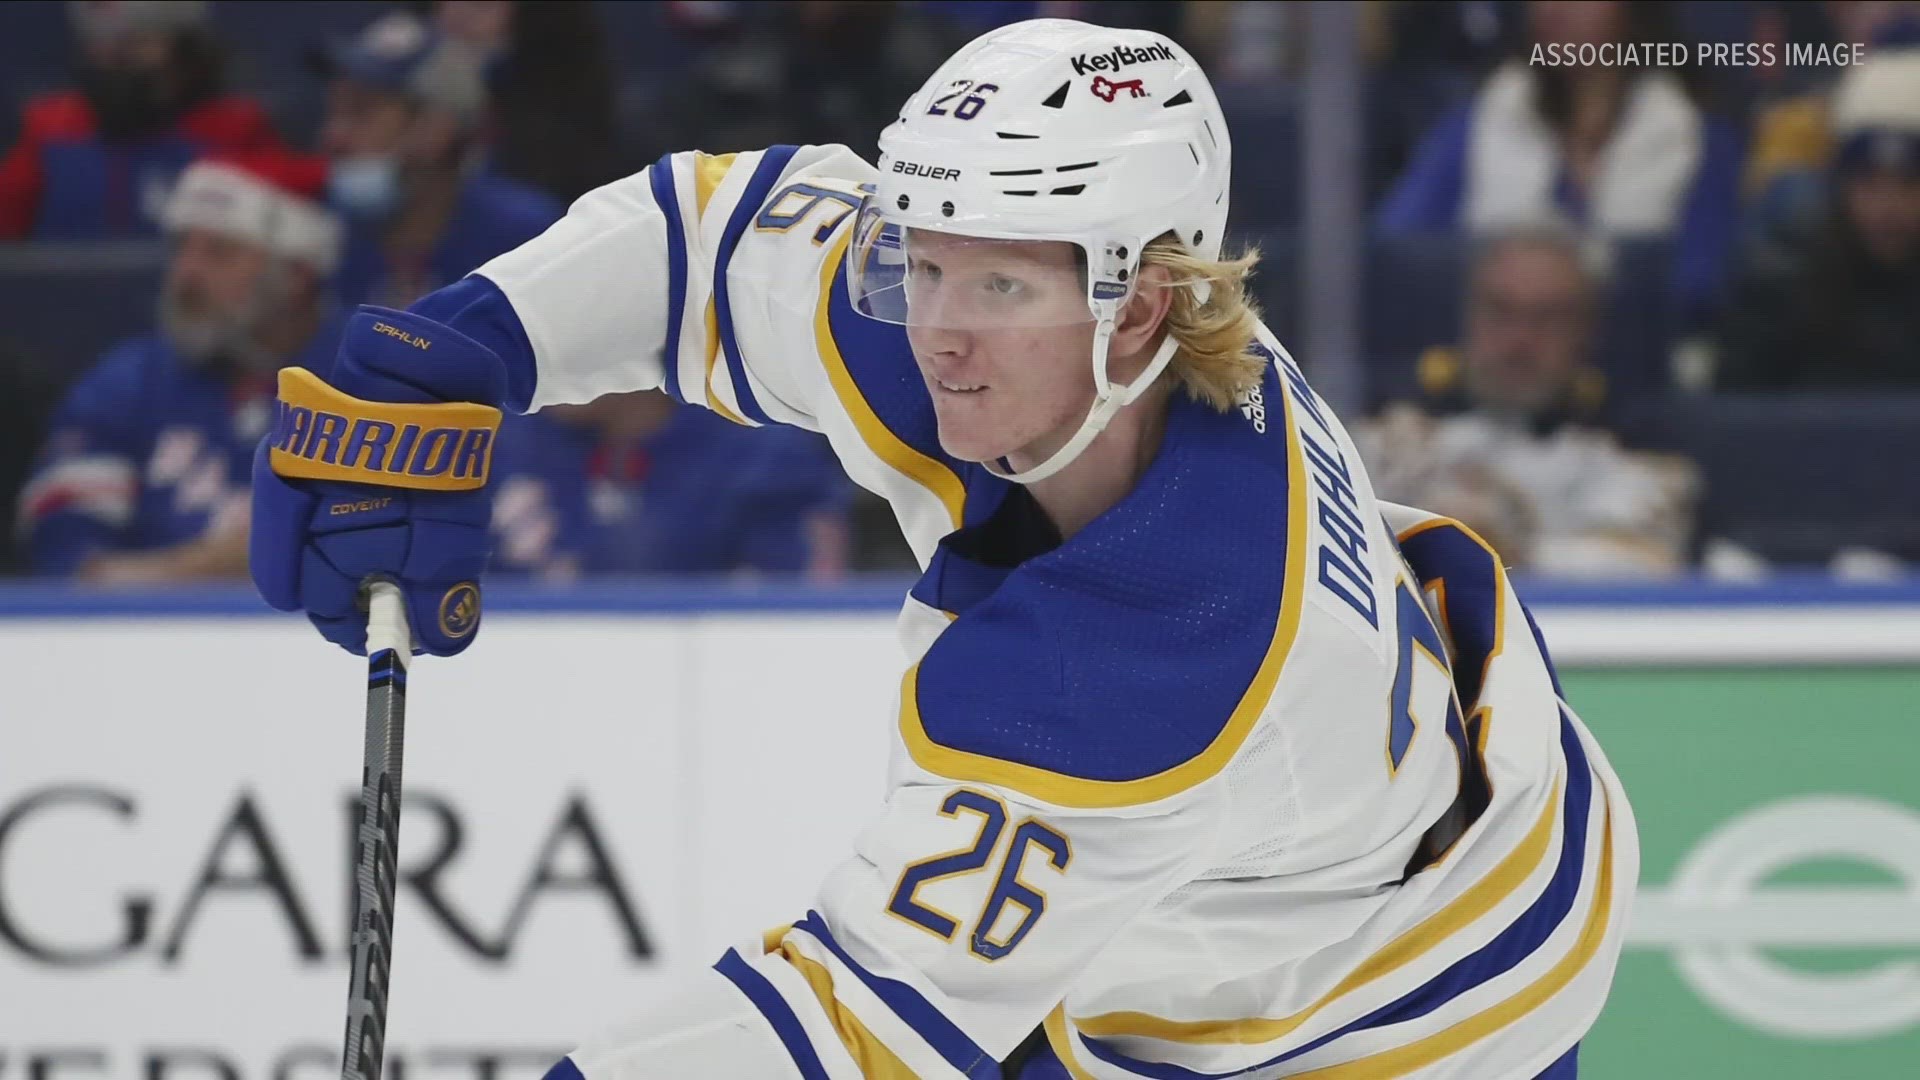 Rasmus Dahlin signed a new 8-year contract, that will pay him an average of 11 million dollars per year, making him the 7-th highest paid player in the N-H-L.